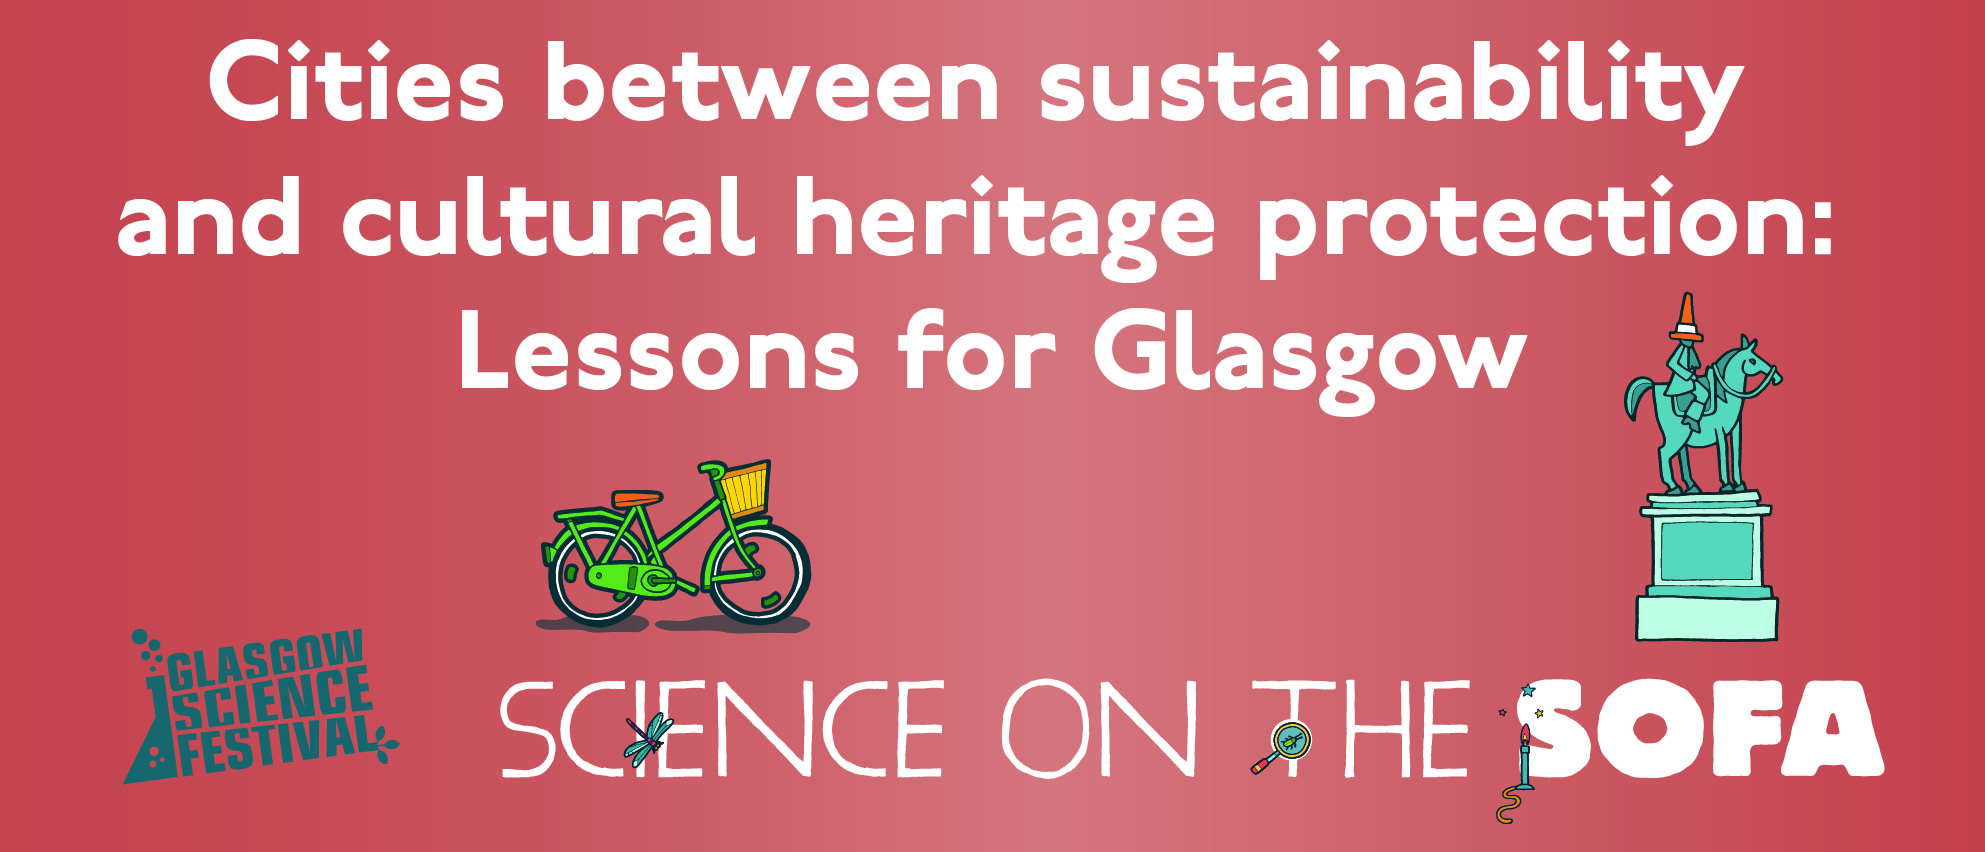 Text reads: Cities between sustainability and cultural heritage protection: Lessons for Glasgow.